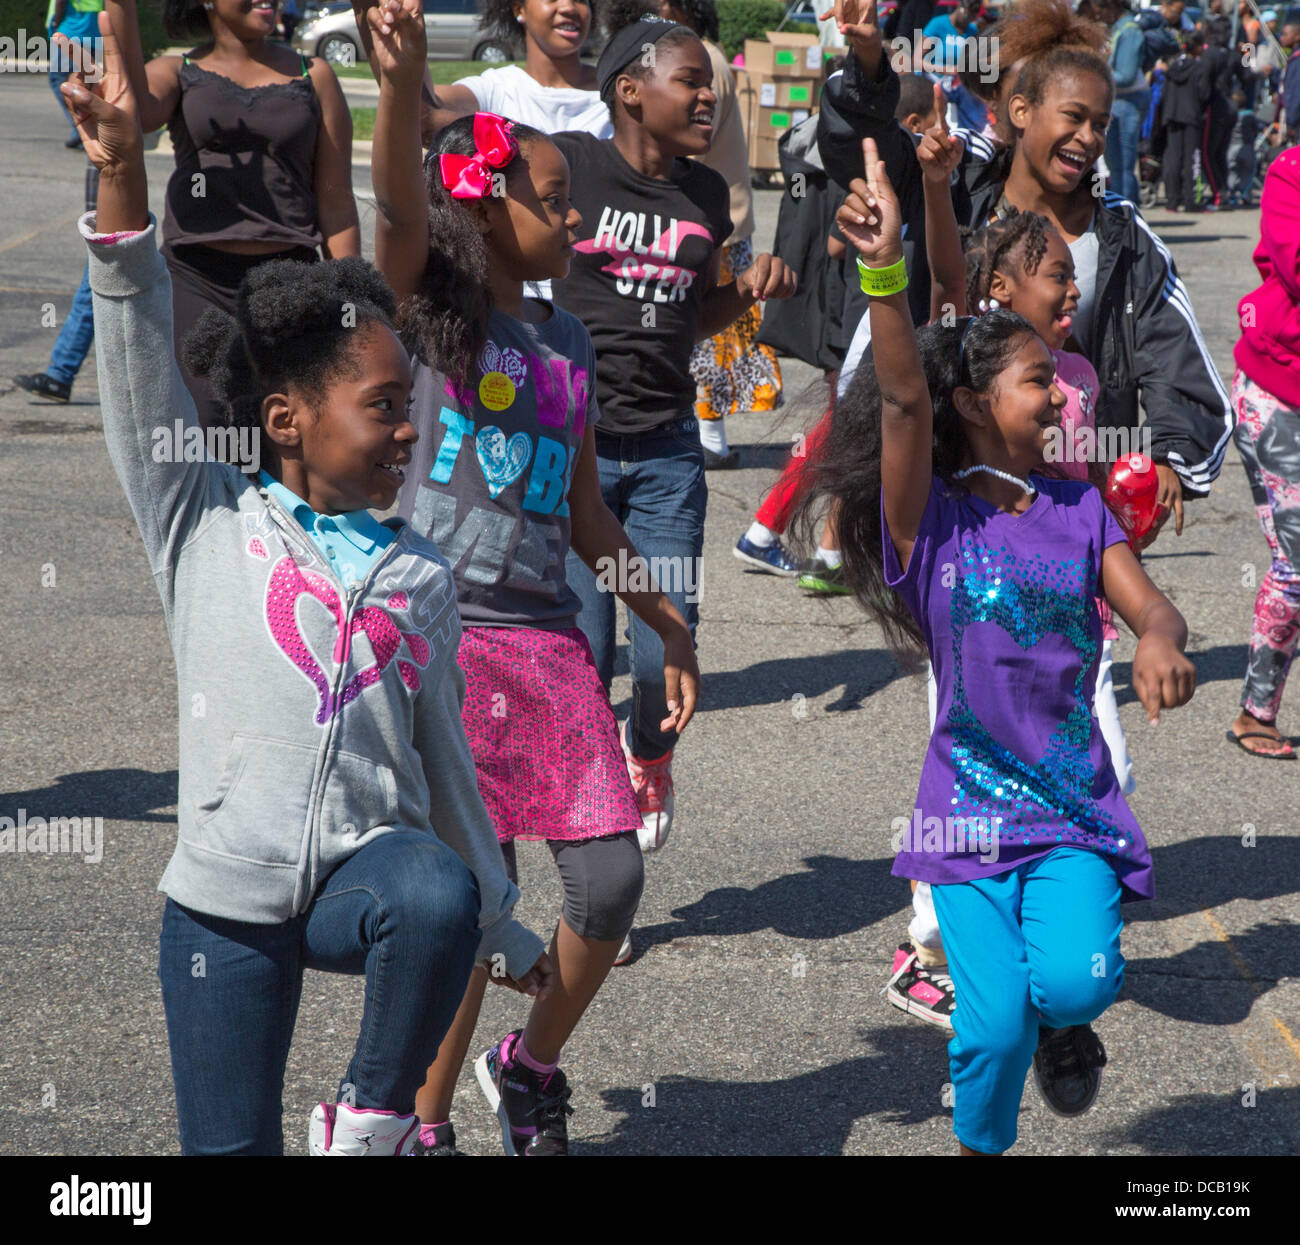 Detroit, Michigan USA. Children dance during an exercise session at a Back to School Festival sponsored by Greater Grace Temple, a 6,000-member Pentecostal church. The annual festival features games, food, health screenings, haircuts, and giveaways of school supplies. Credit:  Jim West/Alamy Live News Stock Photo